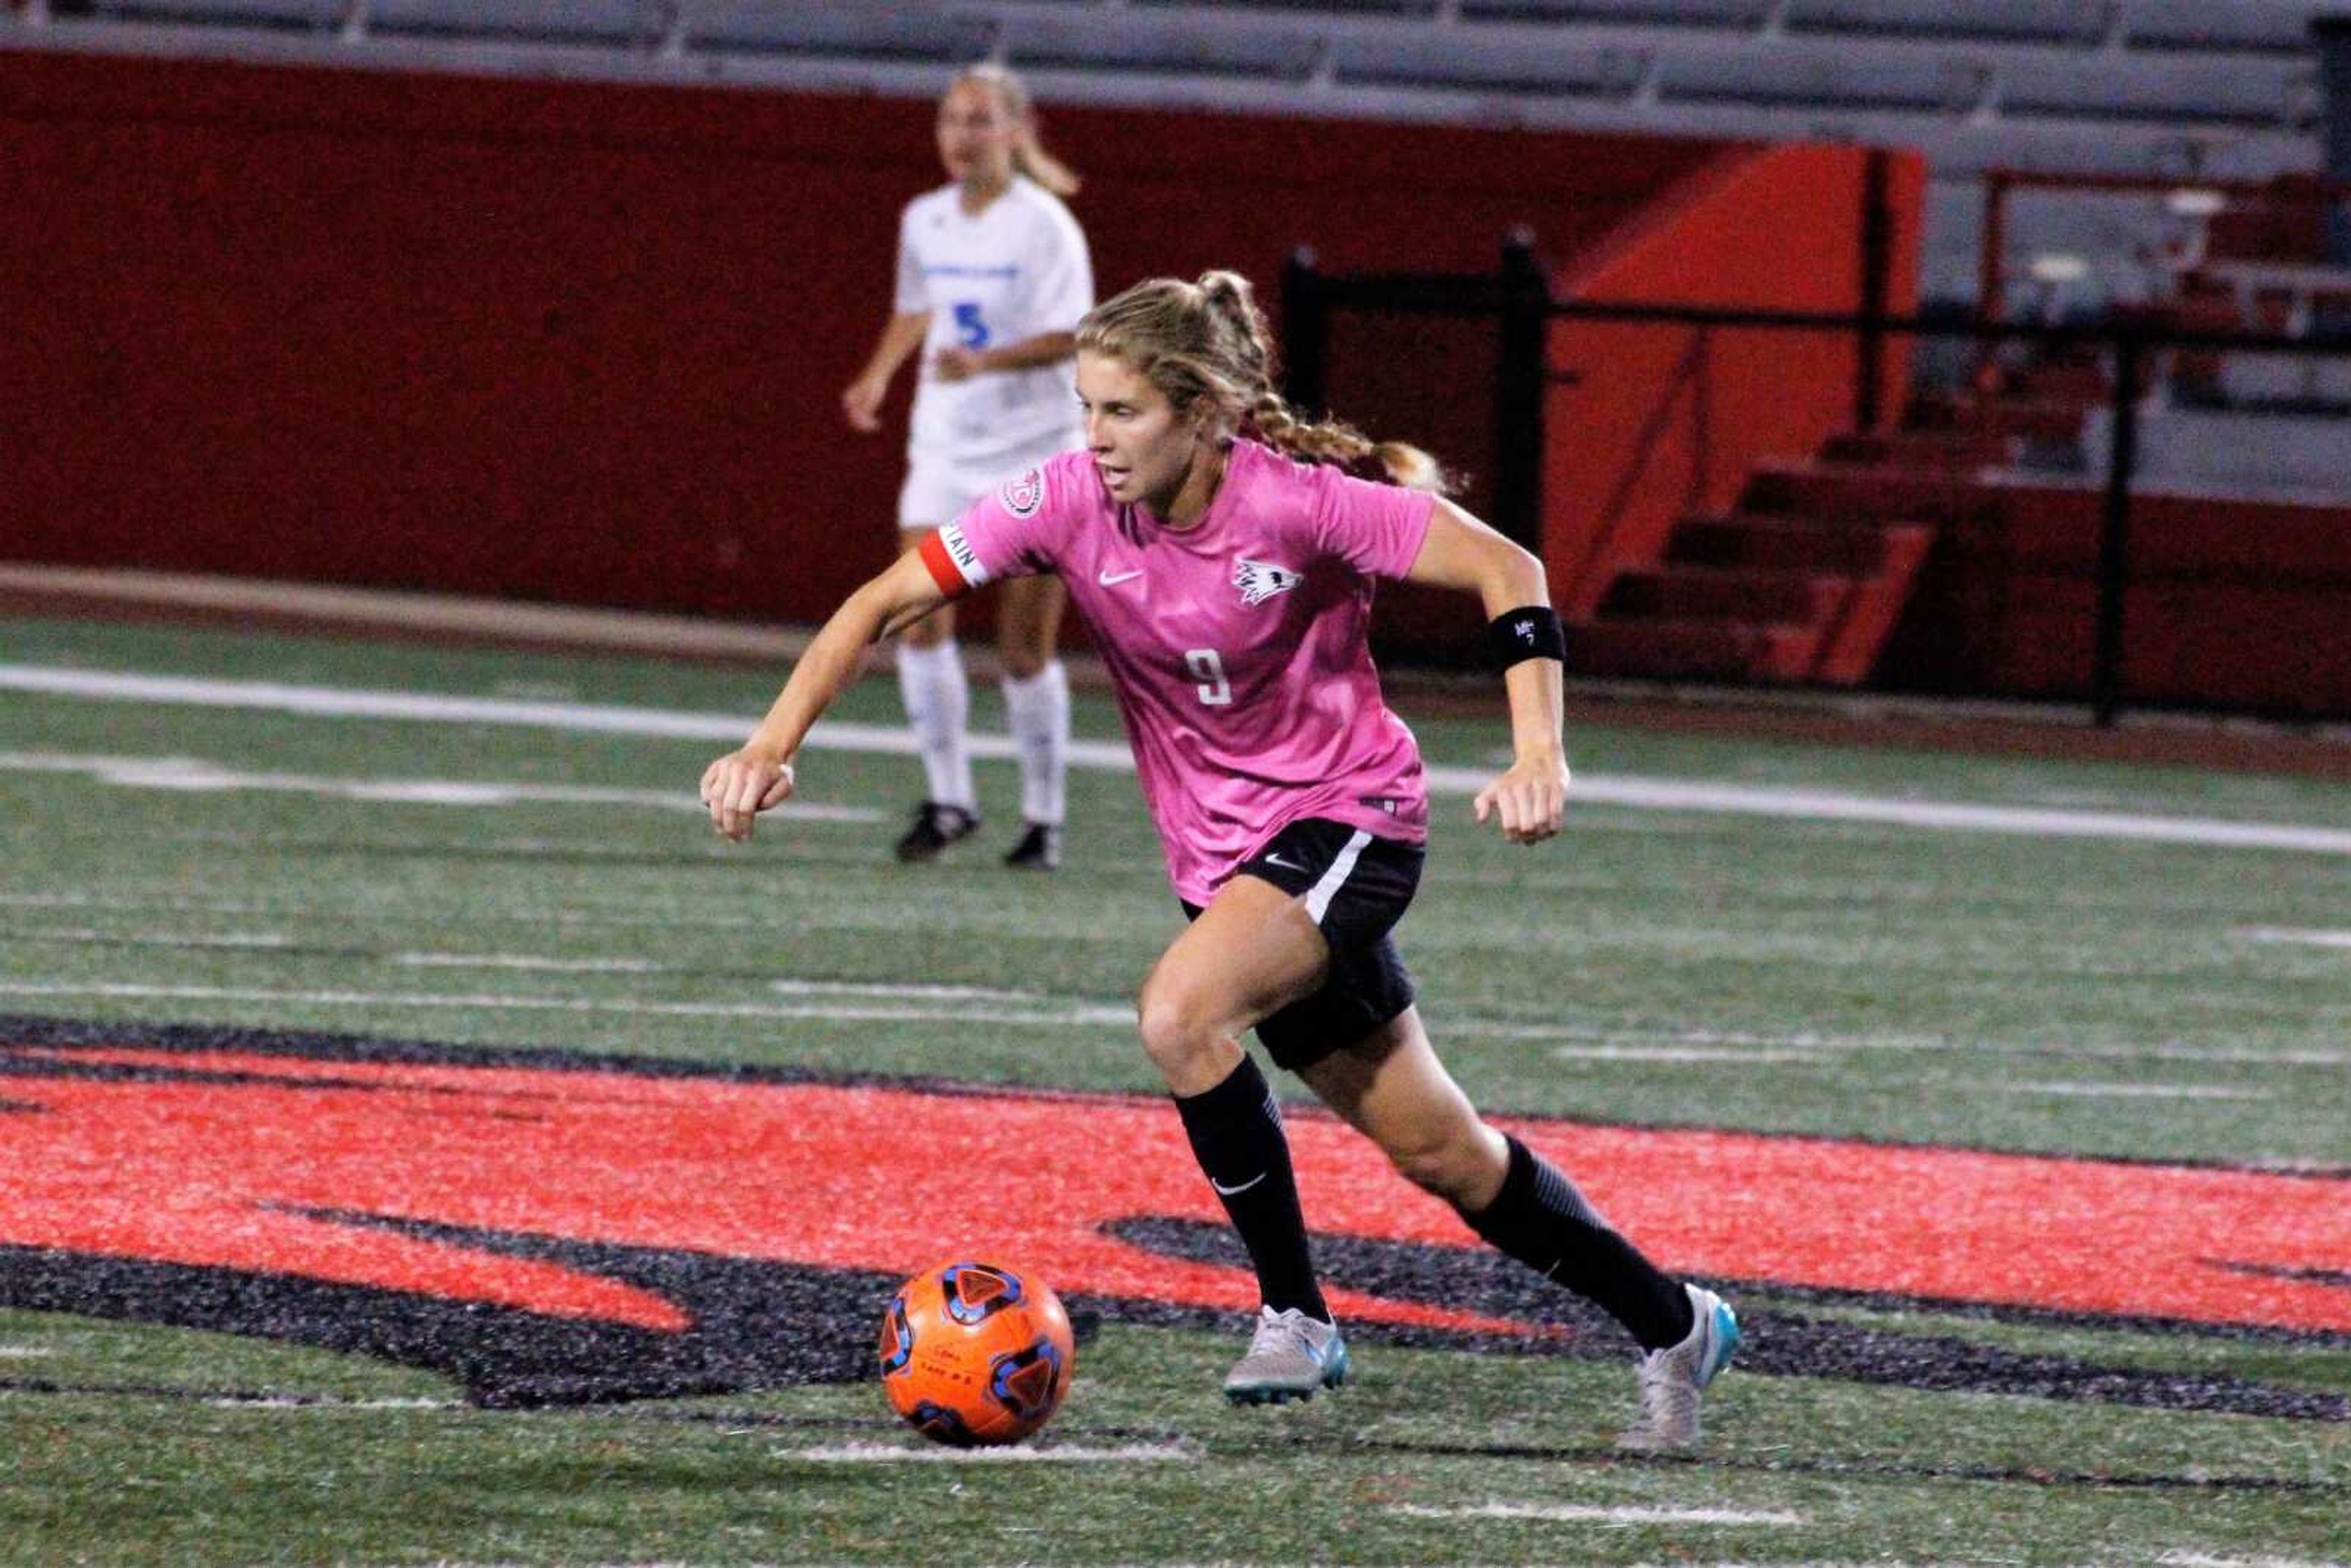 Senior, Maddy Cornell brings the ball into play on Oct.11 against Eastern Illinois.